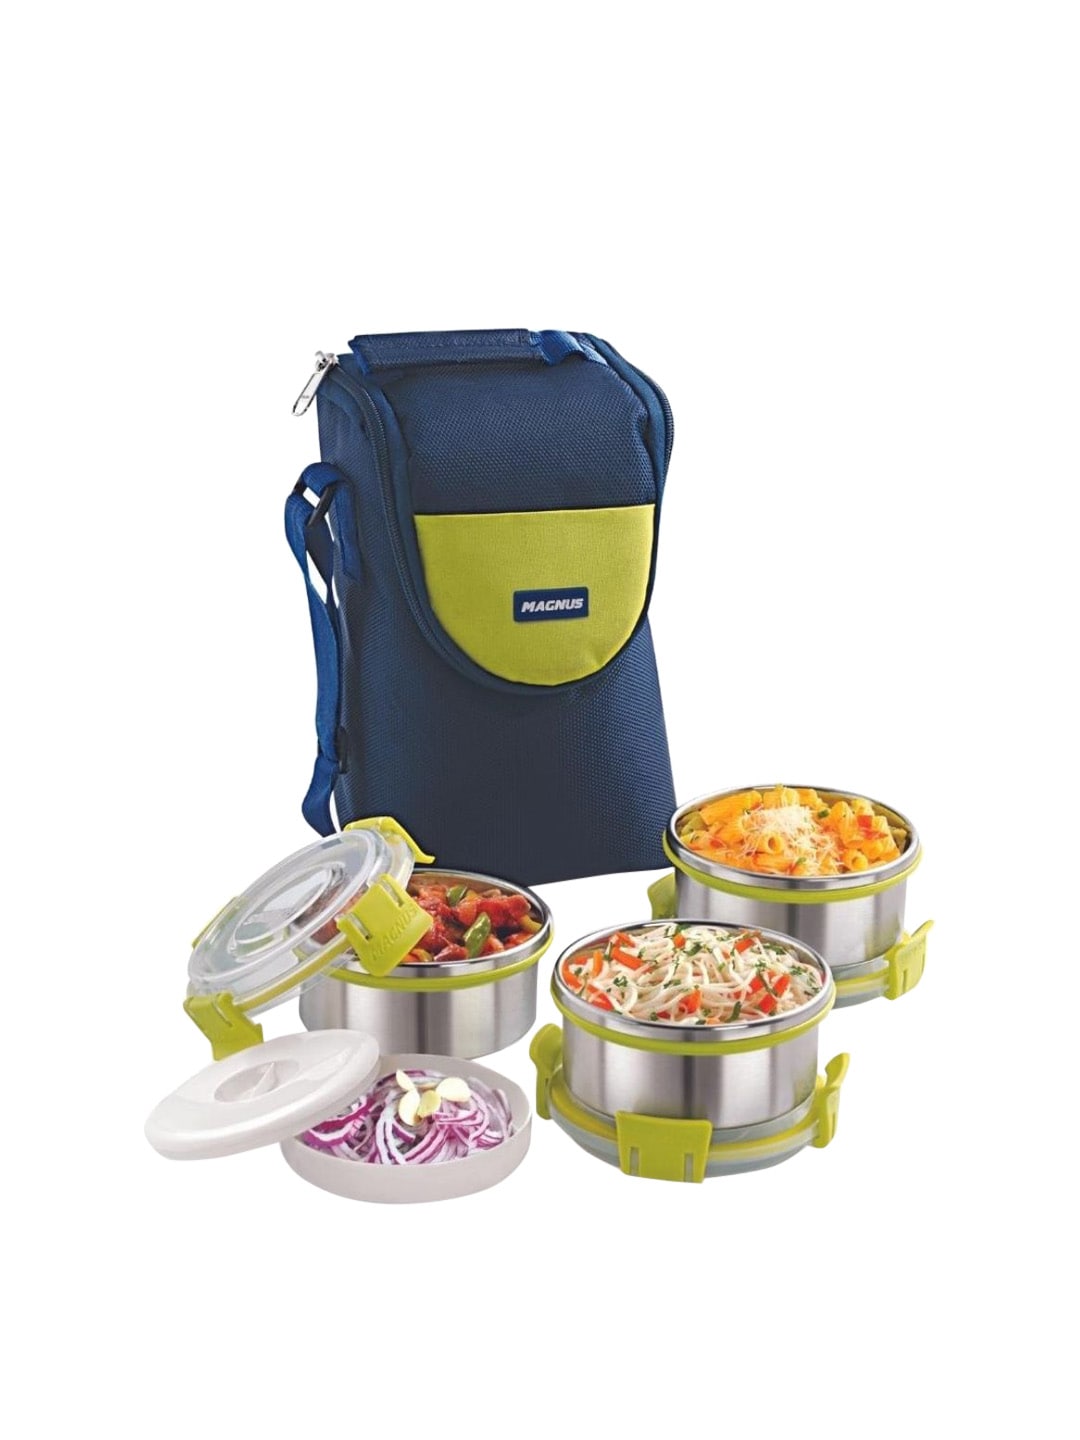 MAGNUS Unisex Navy Blue & Silver-Toned Solid Stainless Steel Lunch Box With Bag Price in India